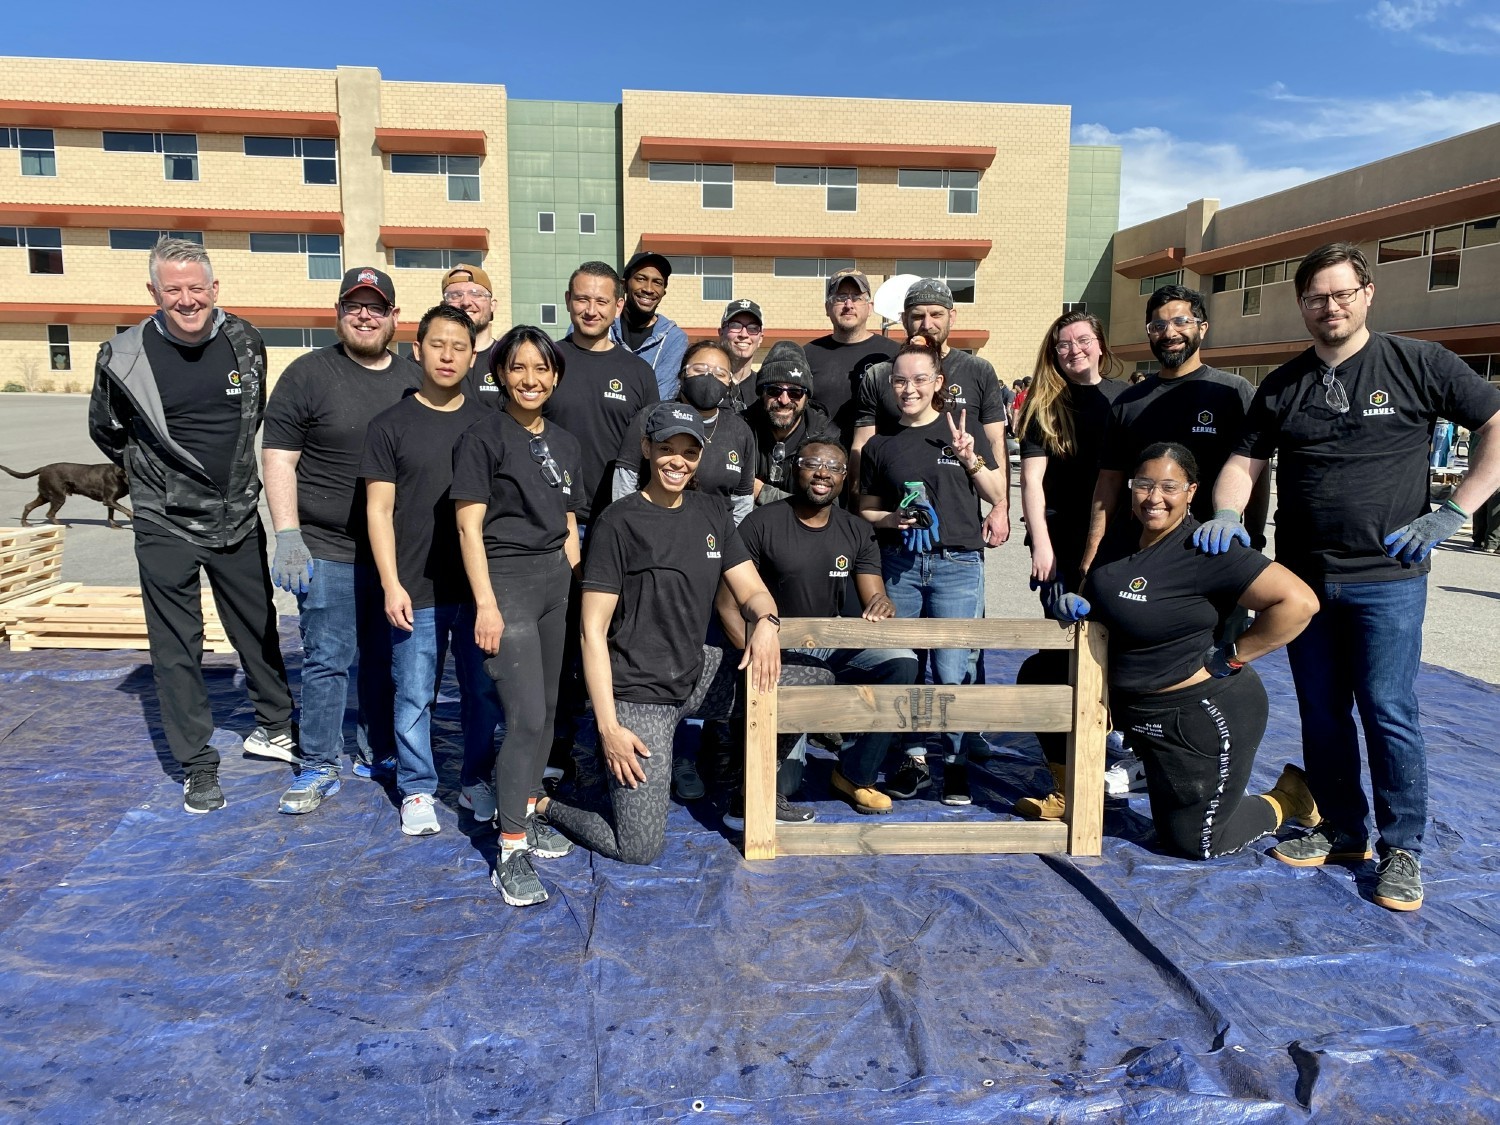 Our Las Vegas team built beds for the local non-profit Sleep in Heavenly Place in partnership with our DK SERVES program